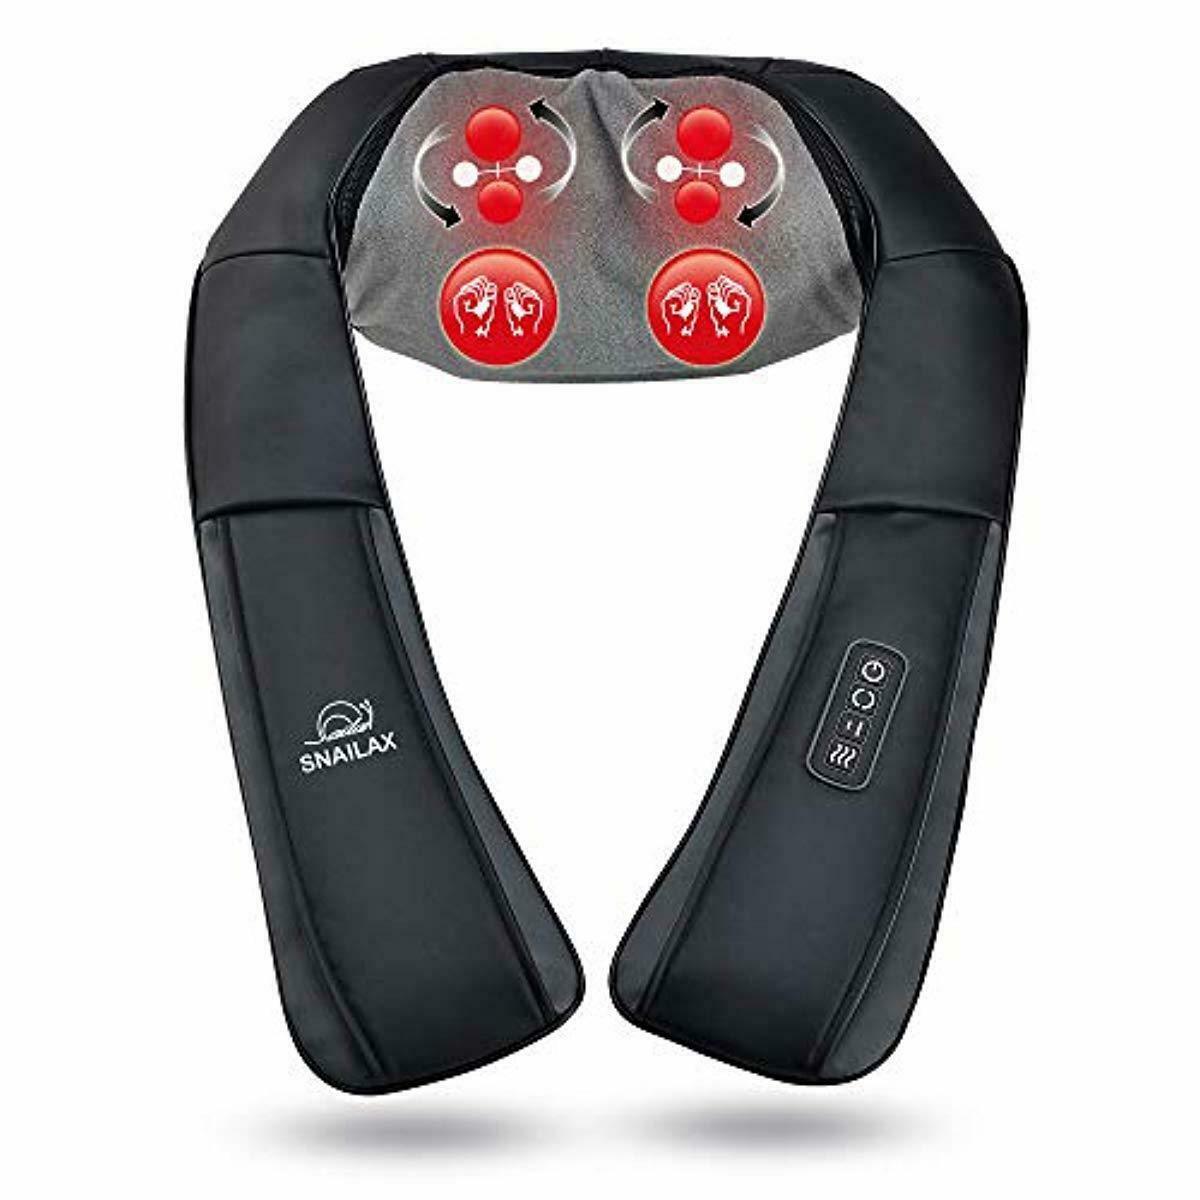 Snailax Shiatsu Percussion Neck And Shoulder Massager With Heat Deep